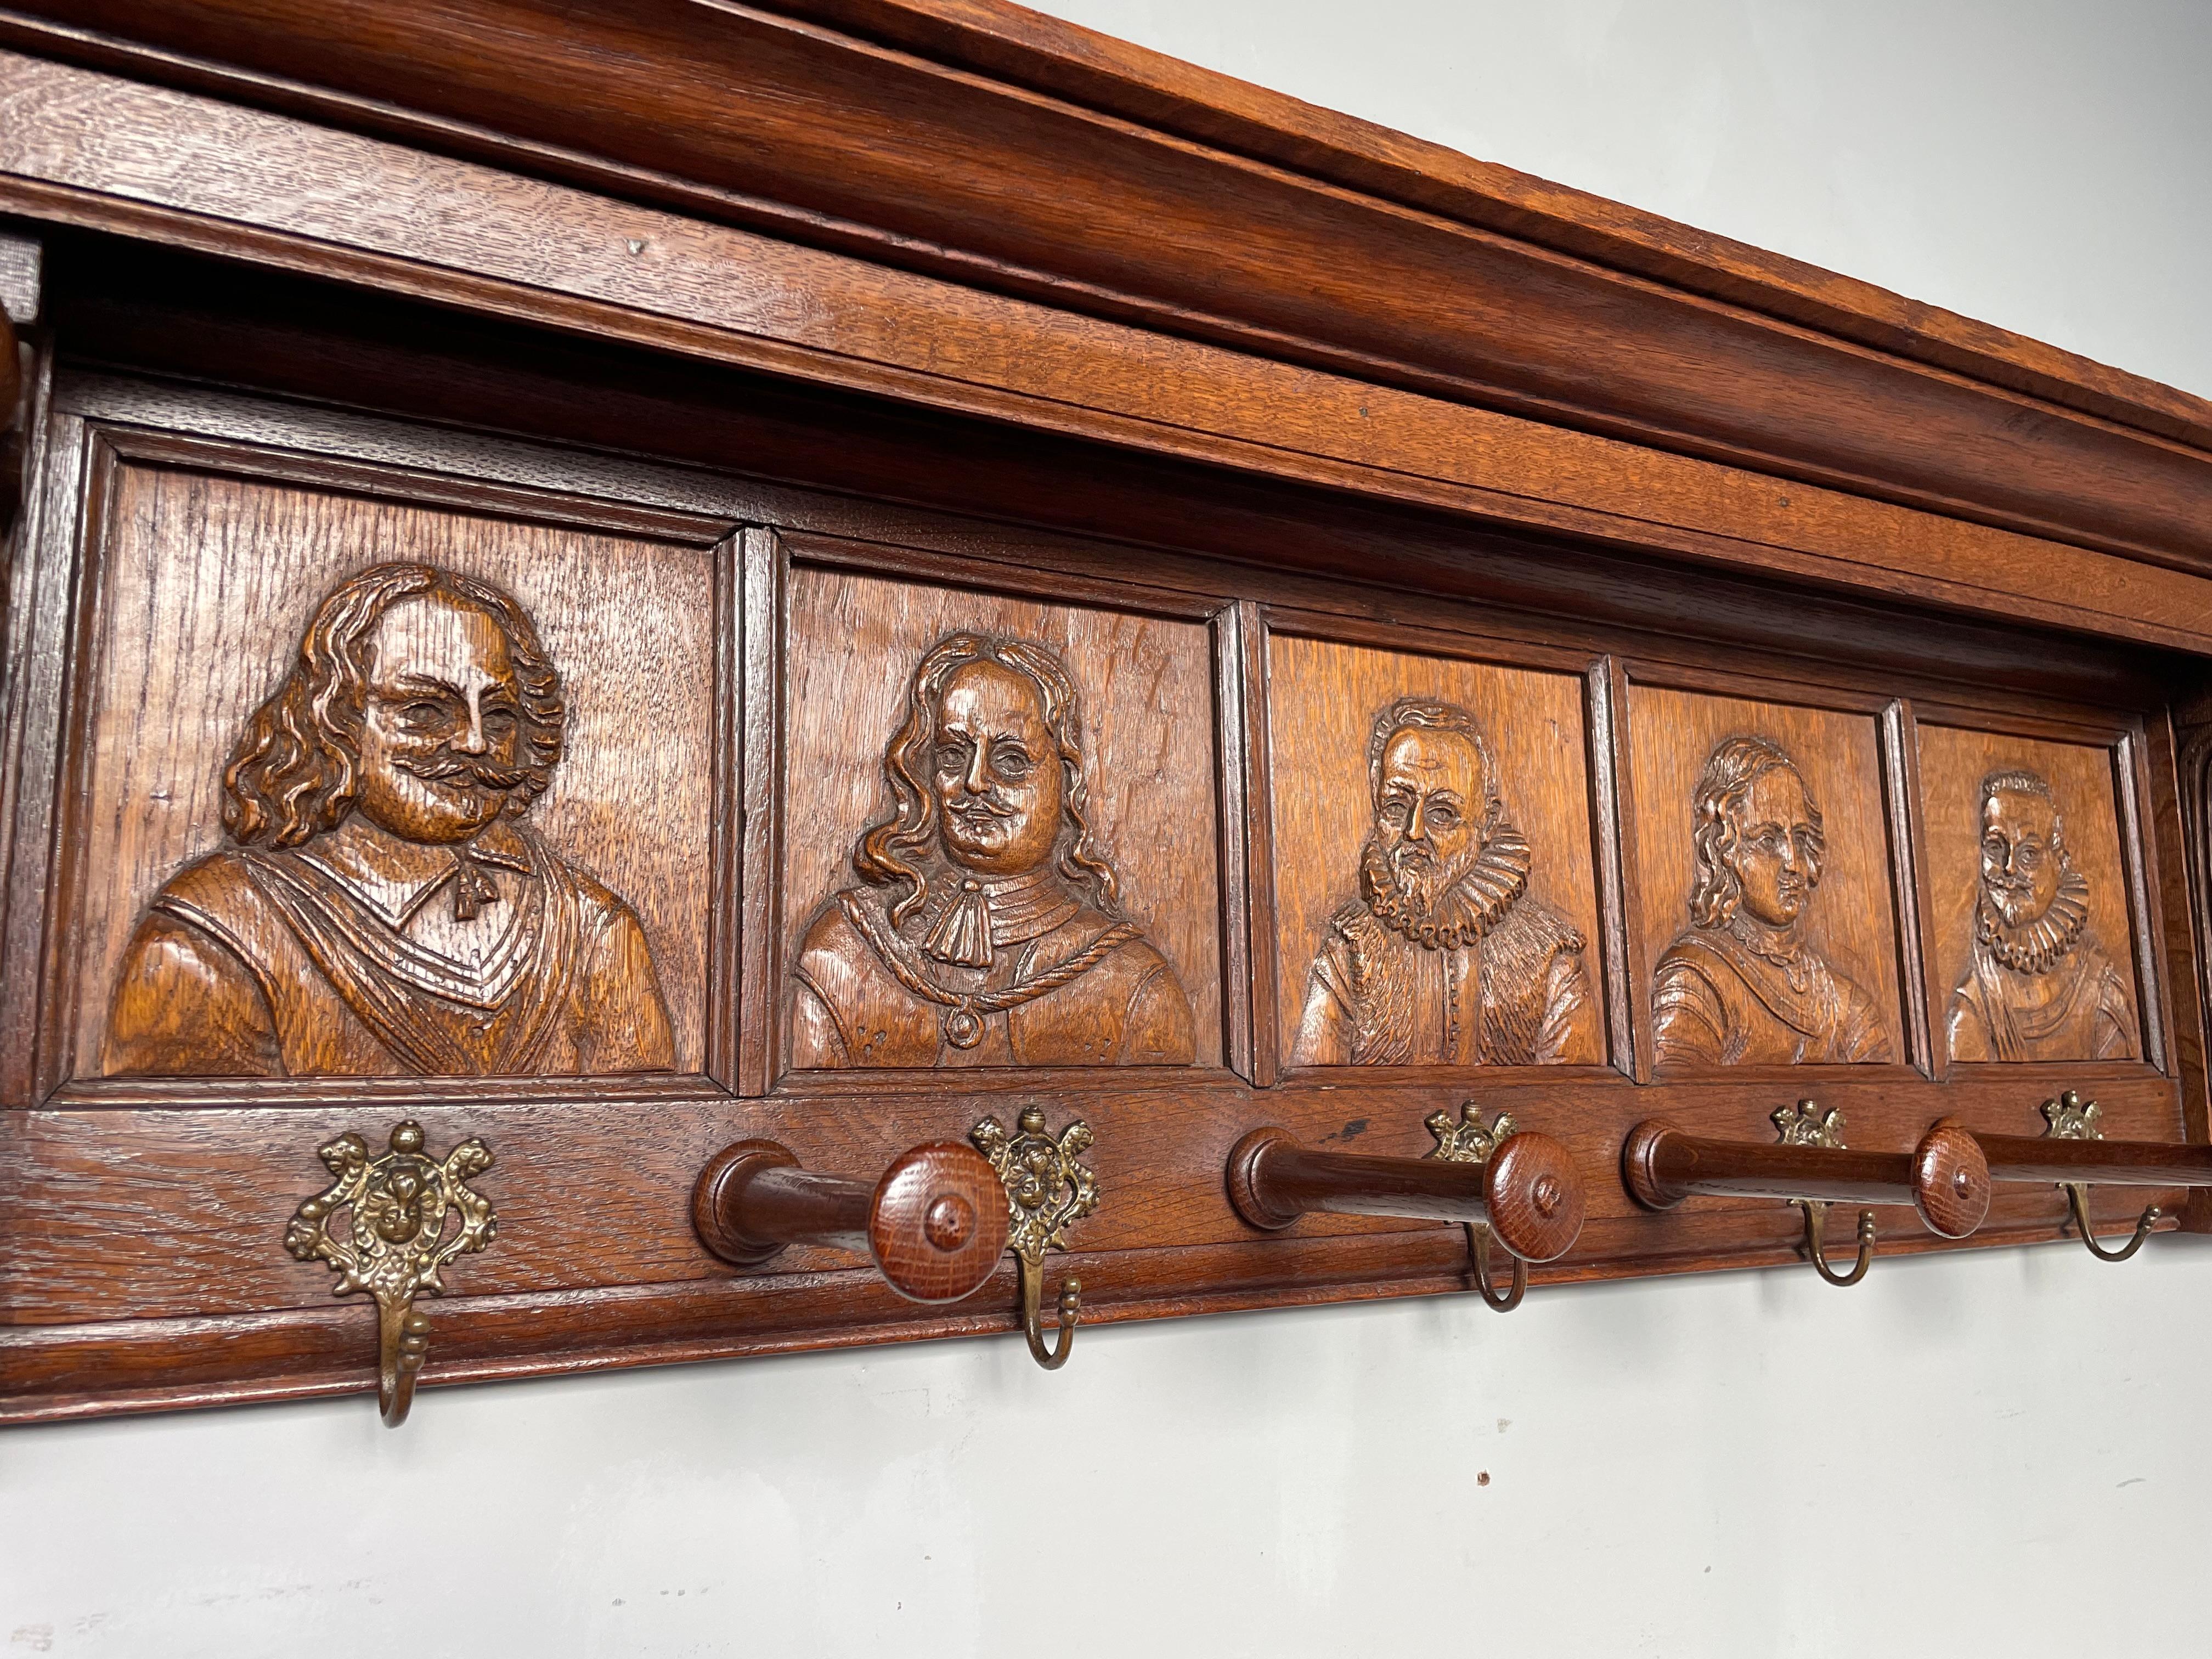 Metal Antique Renaissance Wall Coat Rack Homage to Rembrandt & The Night Watch ca 1880 For Sale